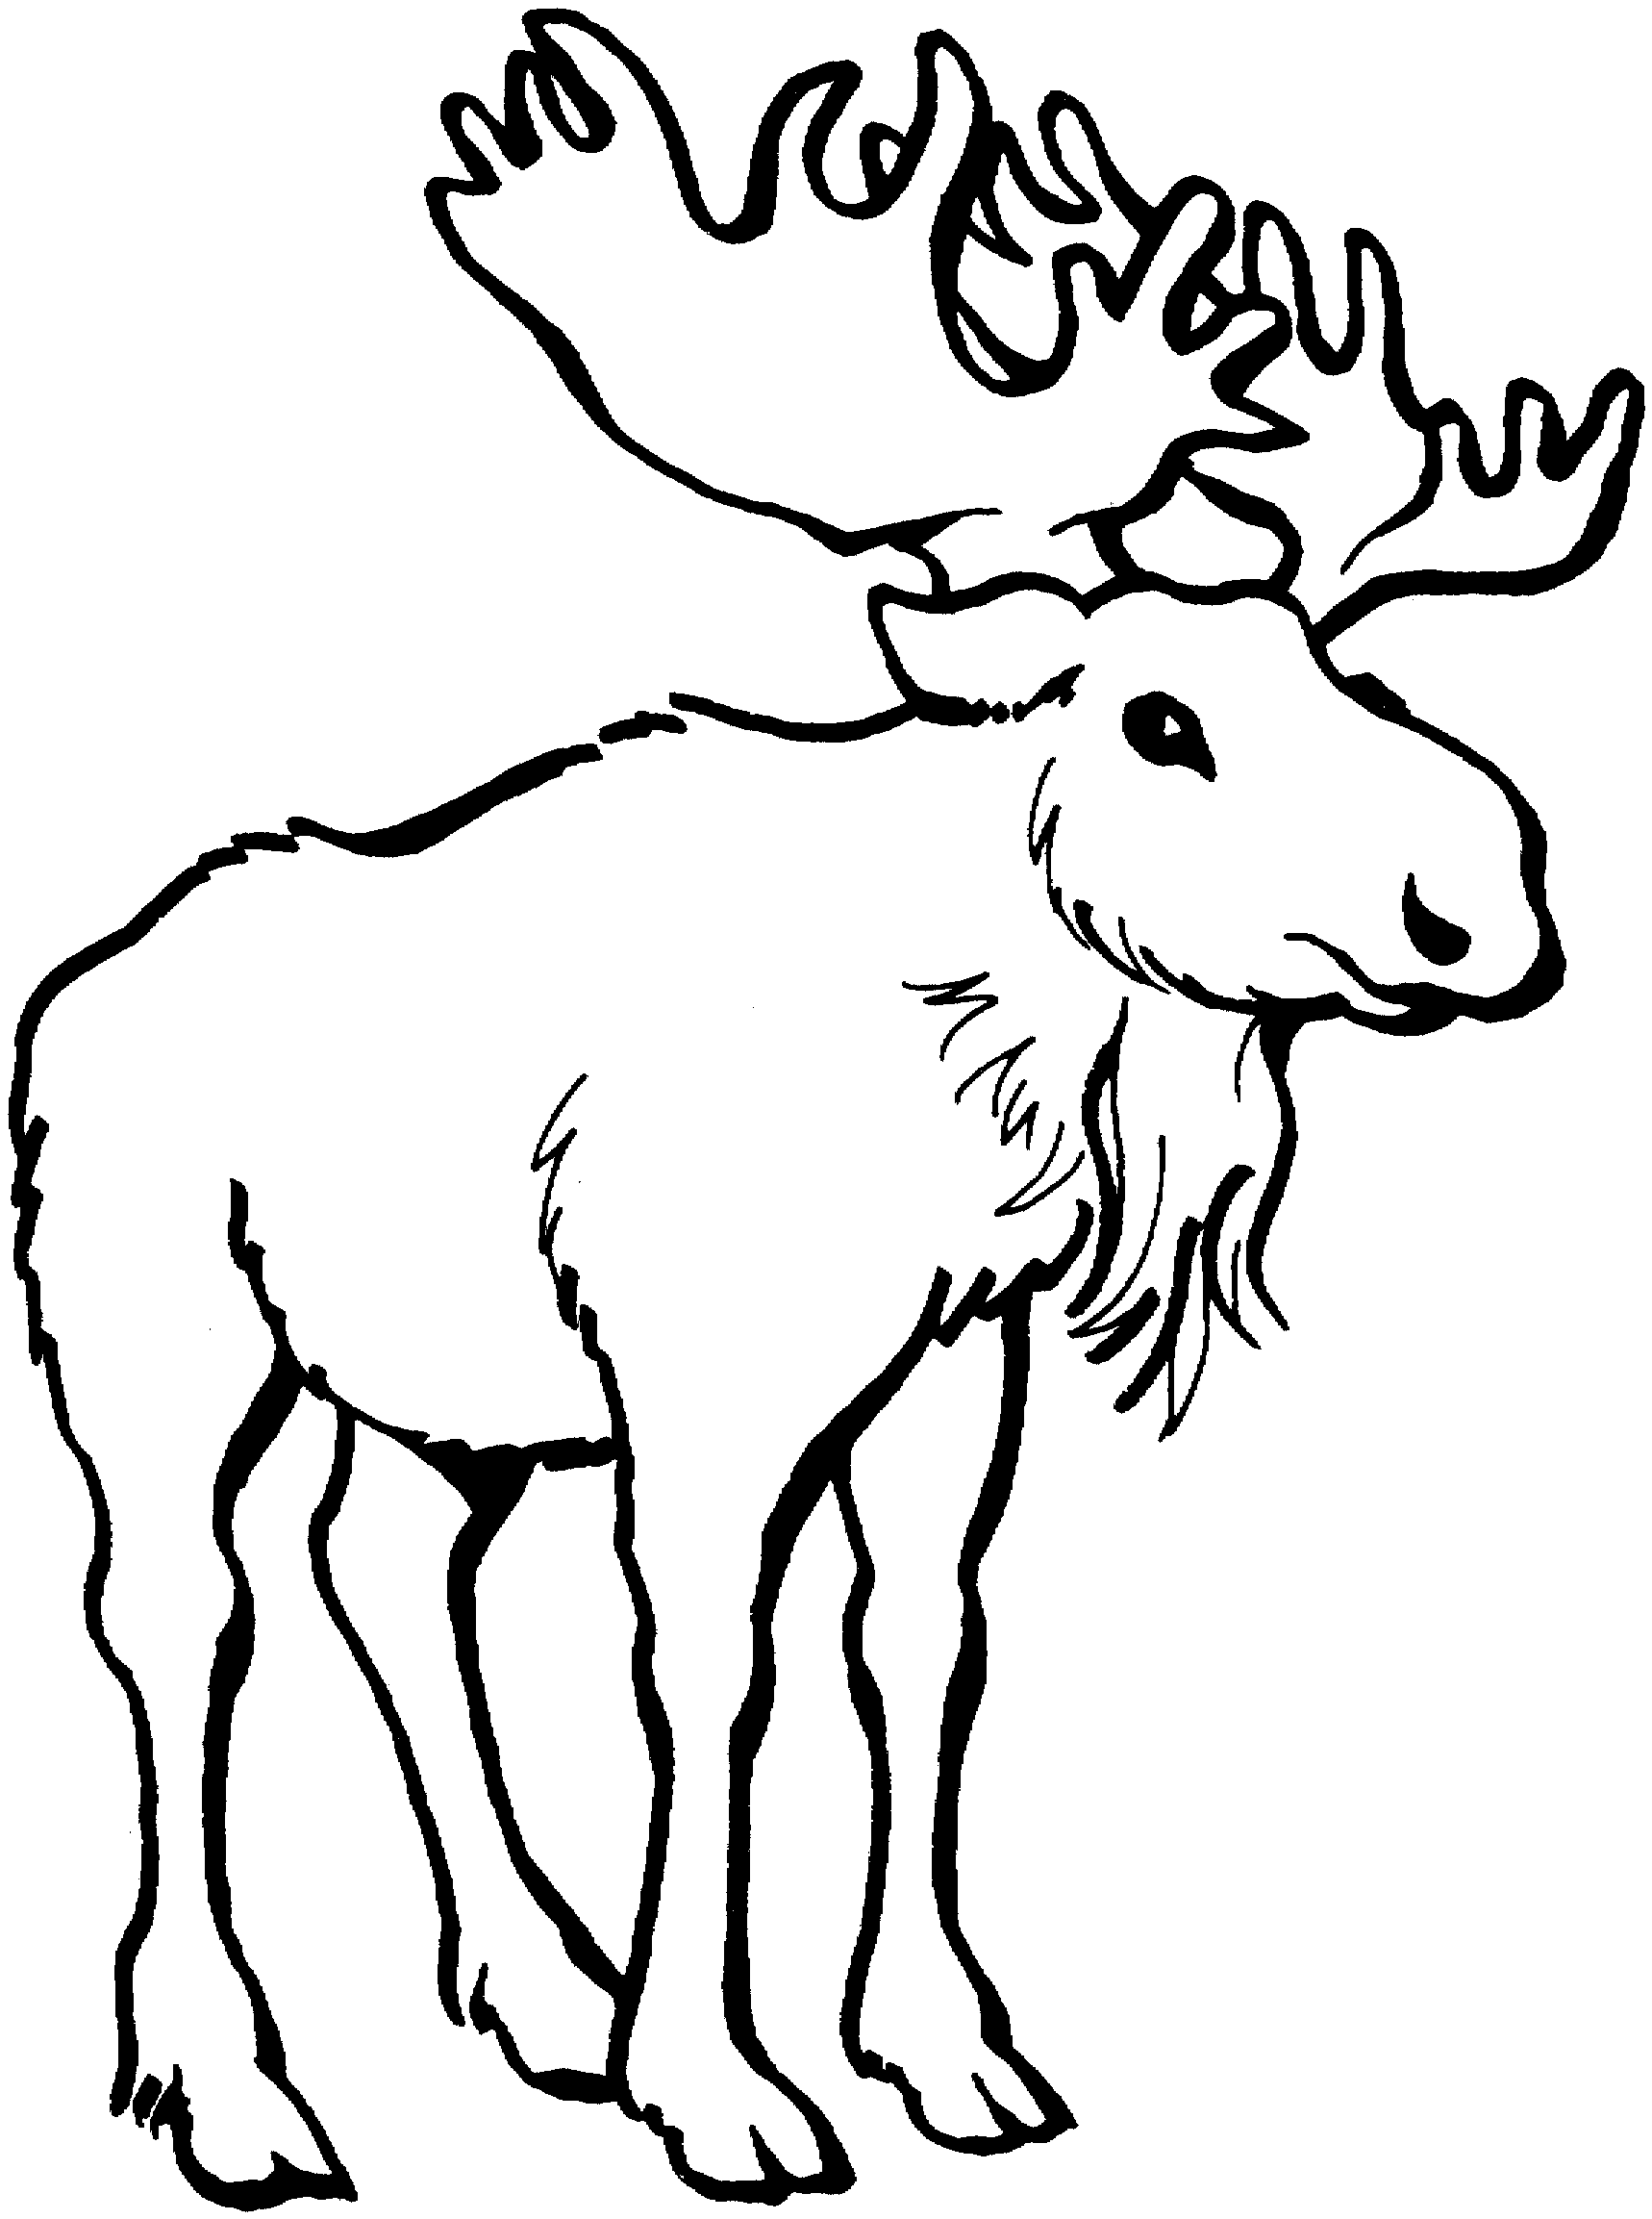 Moose clipart game wild. Free cliparts download clip